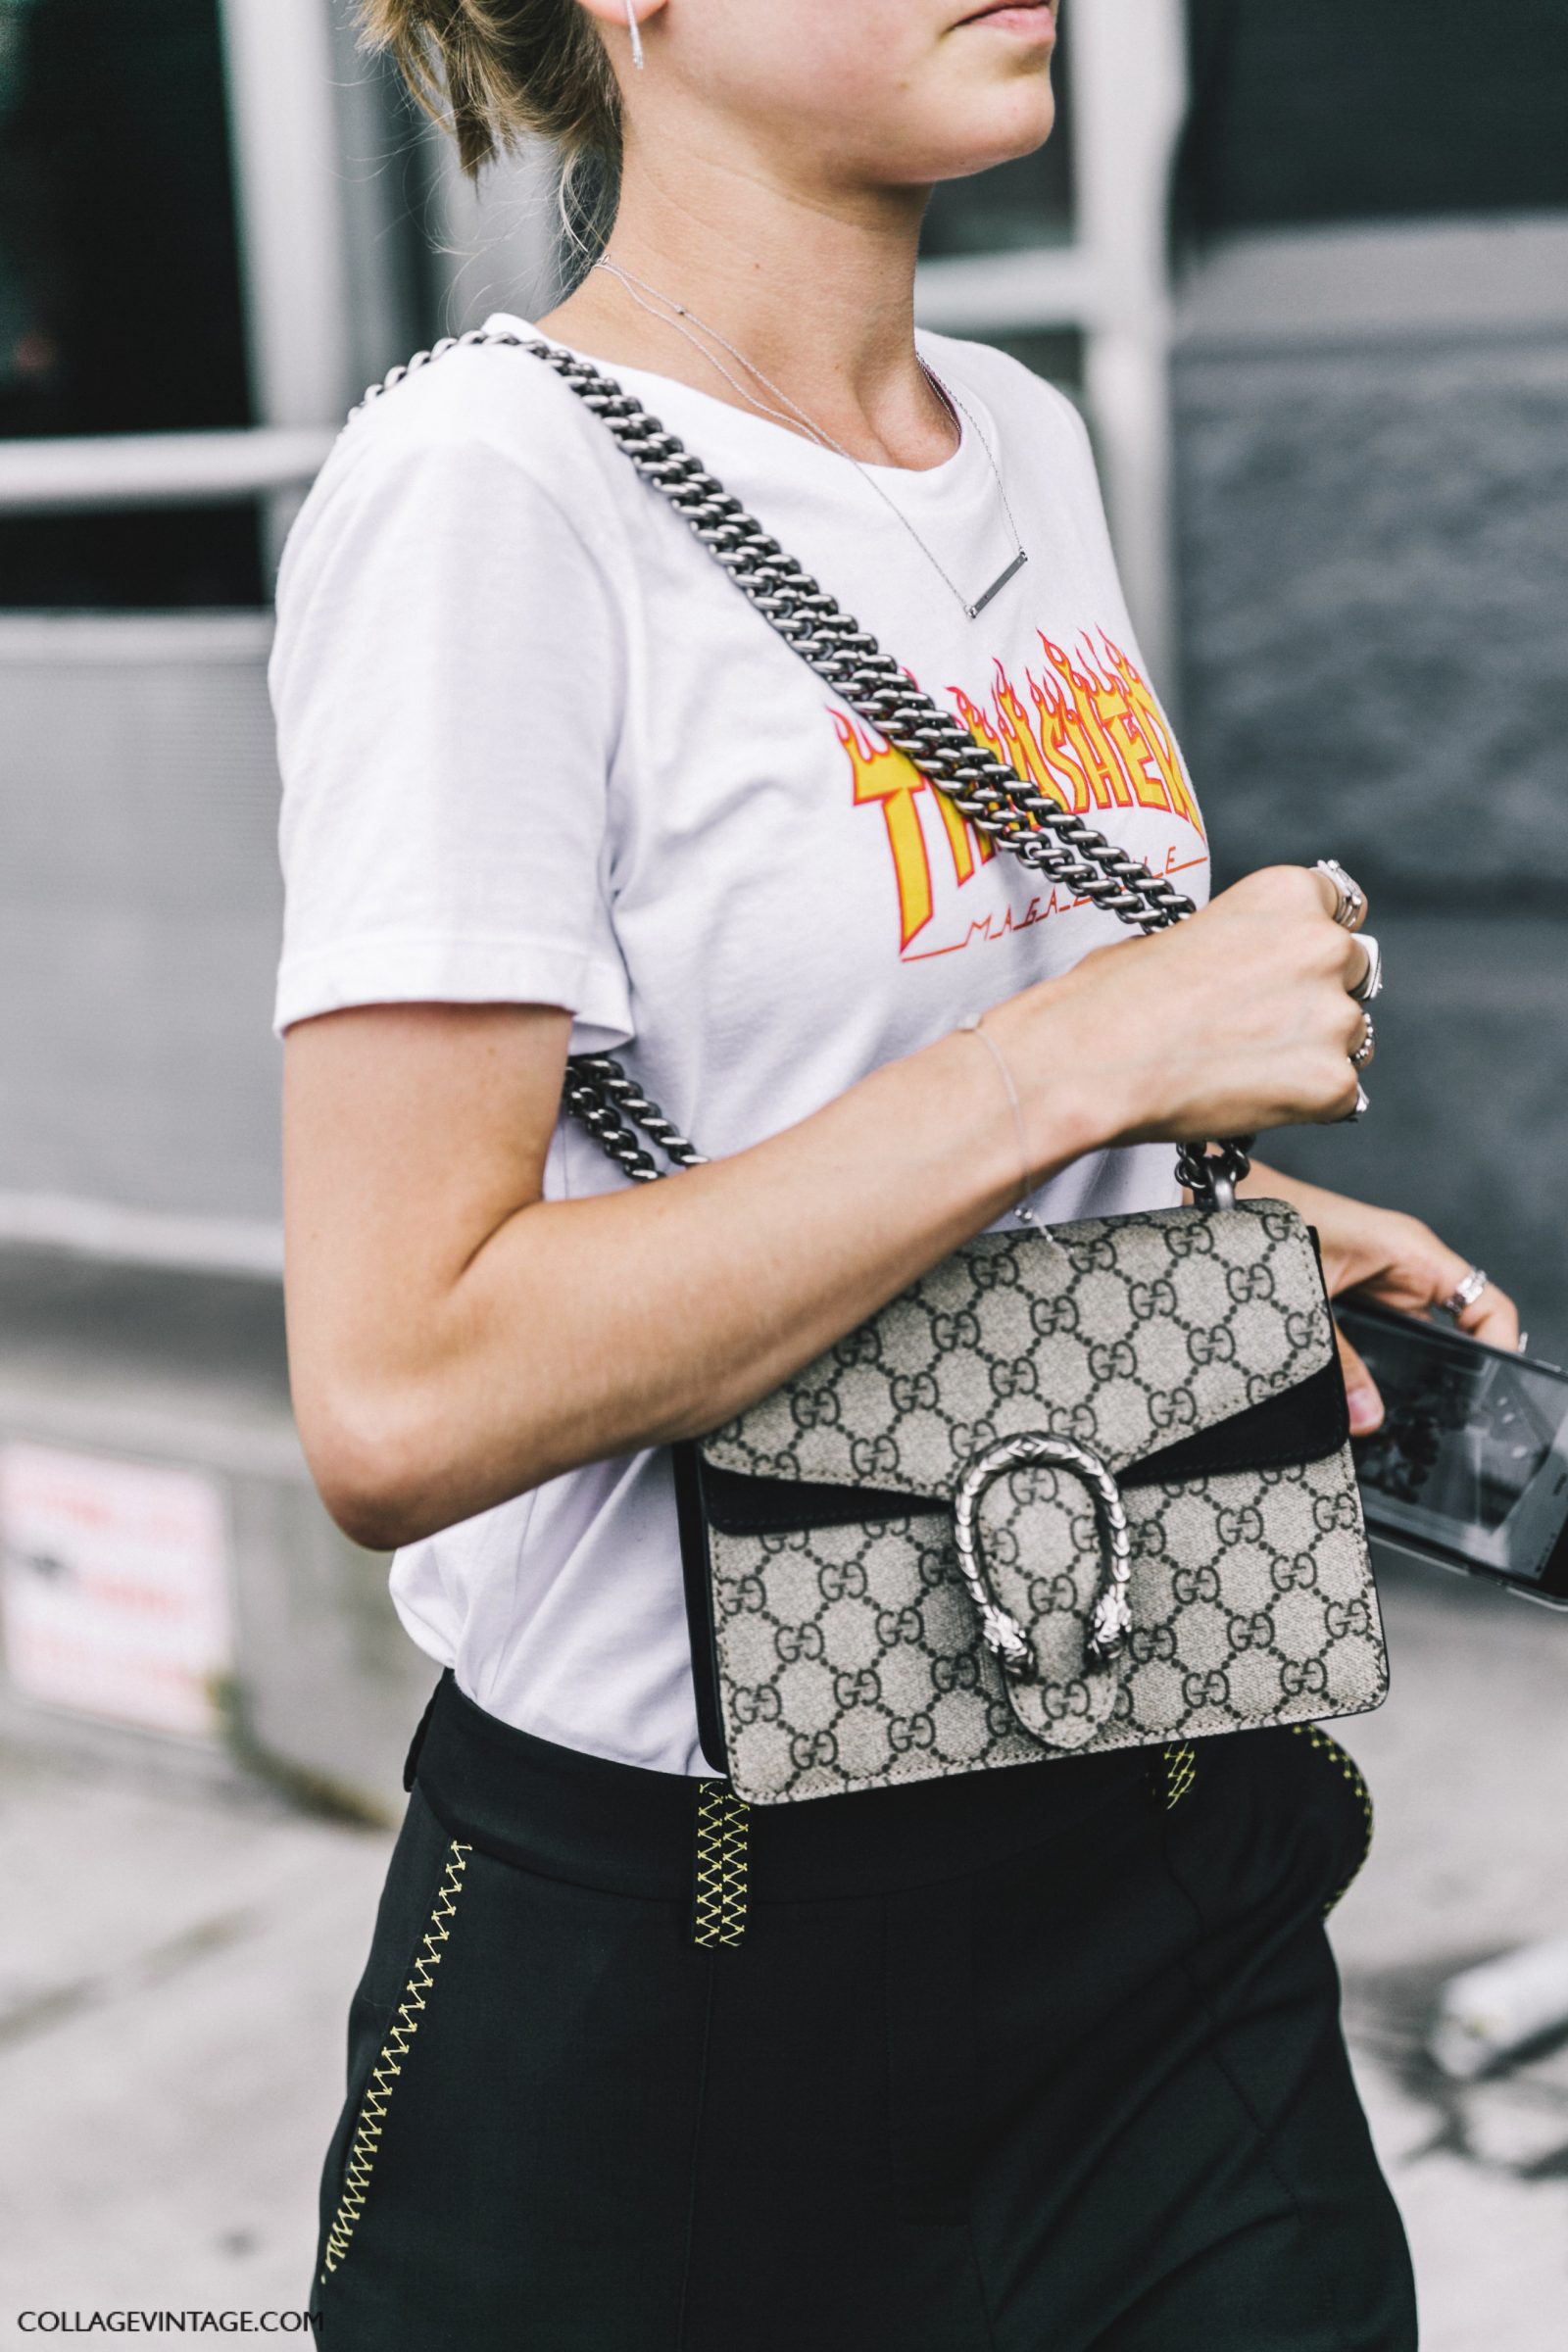 nyfw-new_york_fashion_week_ss17-street_style-outfits-collage_vintage-jessica_minkoff-earrings-graphic_tee-black_trousers-chloe_sandals-gucci_bag-4